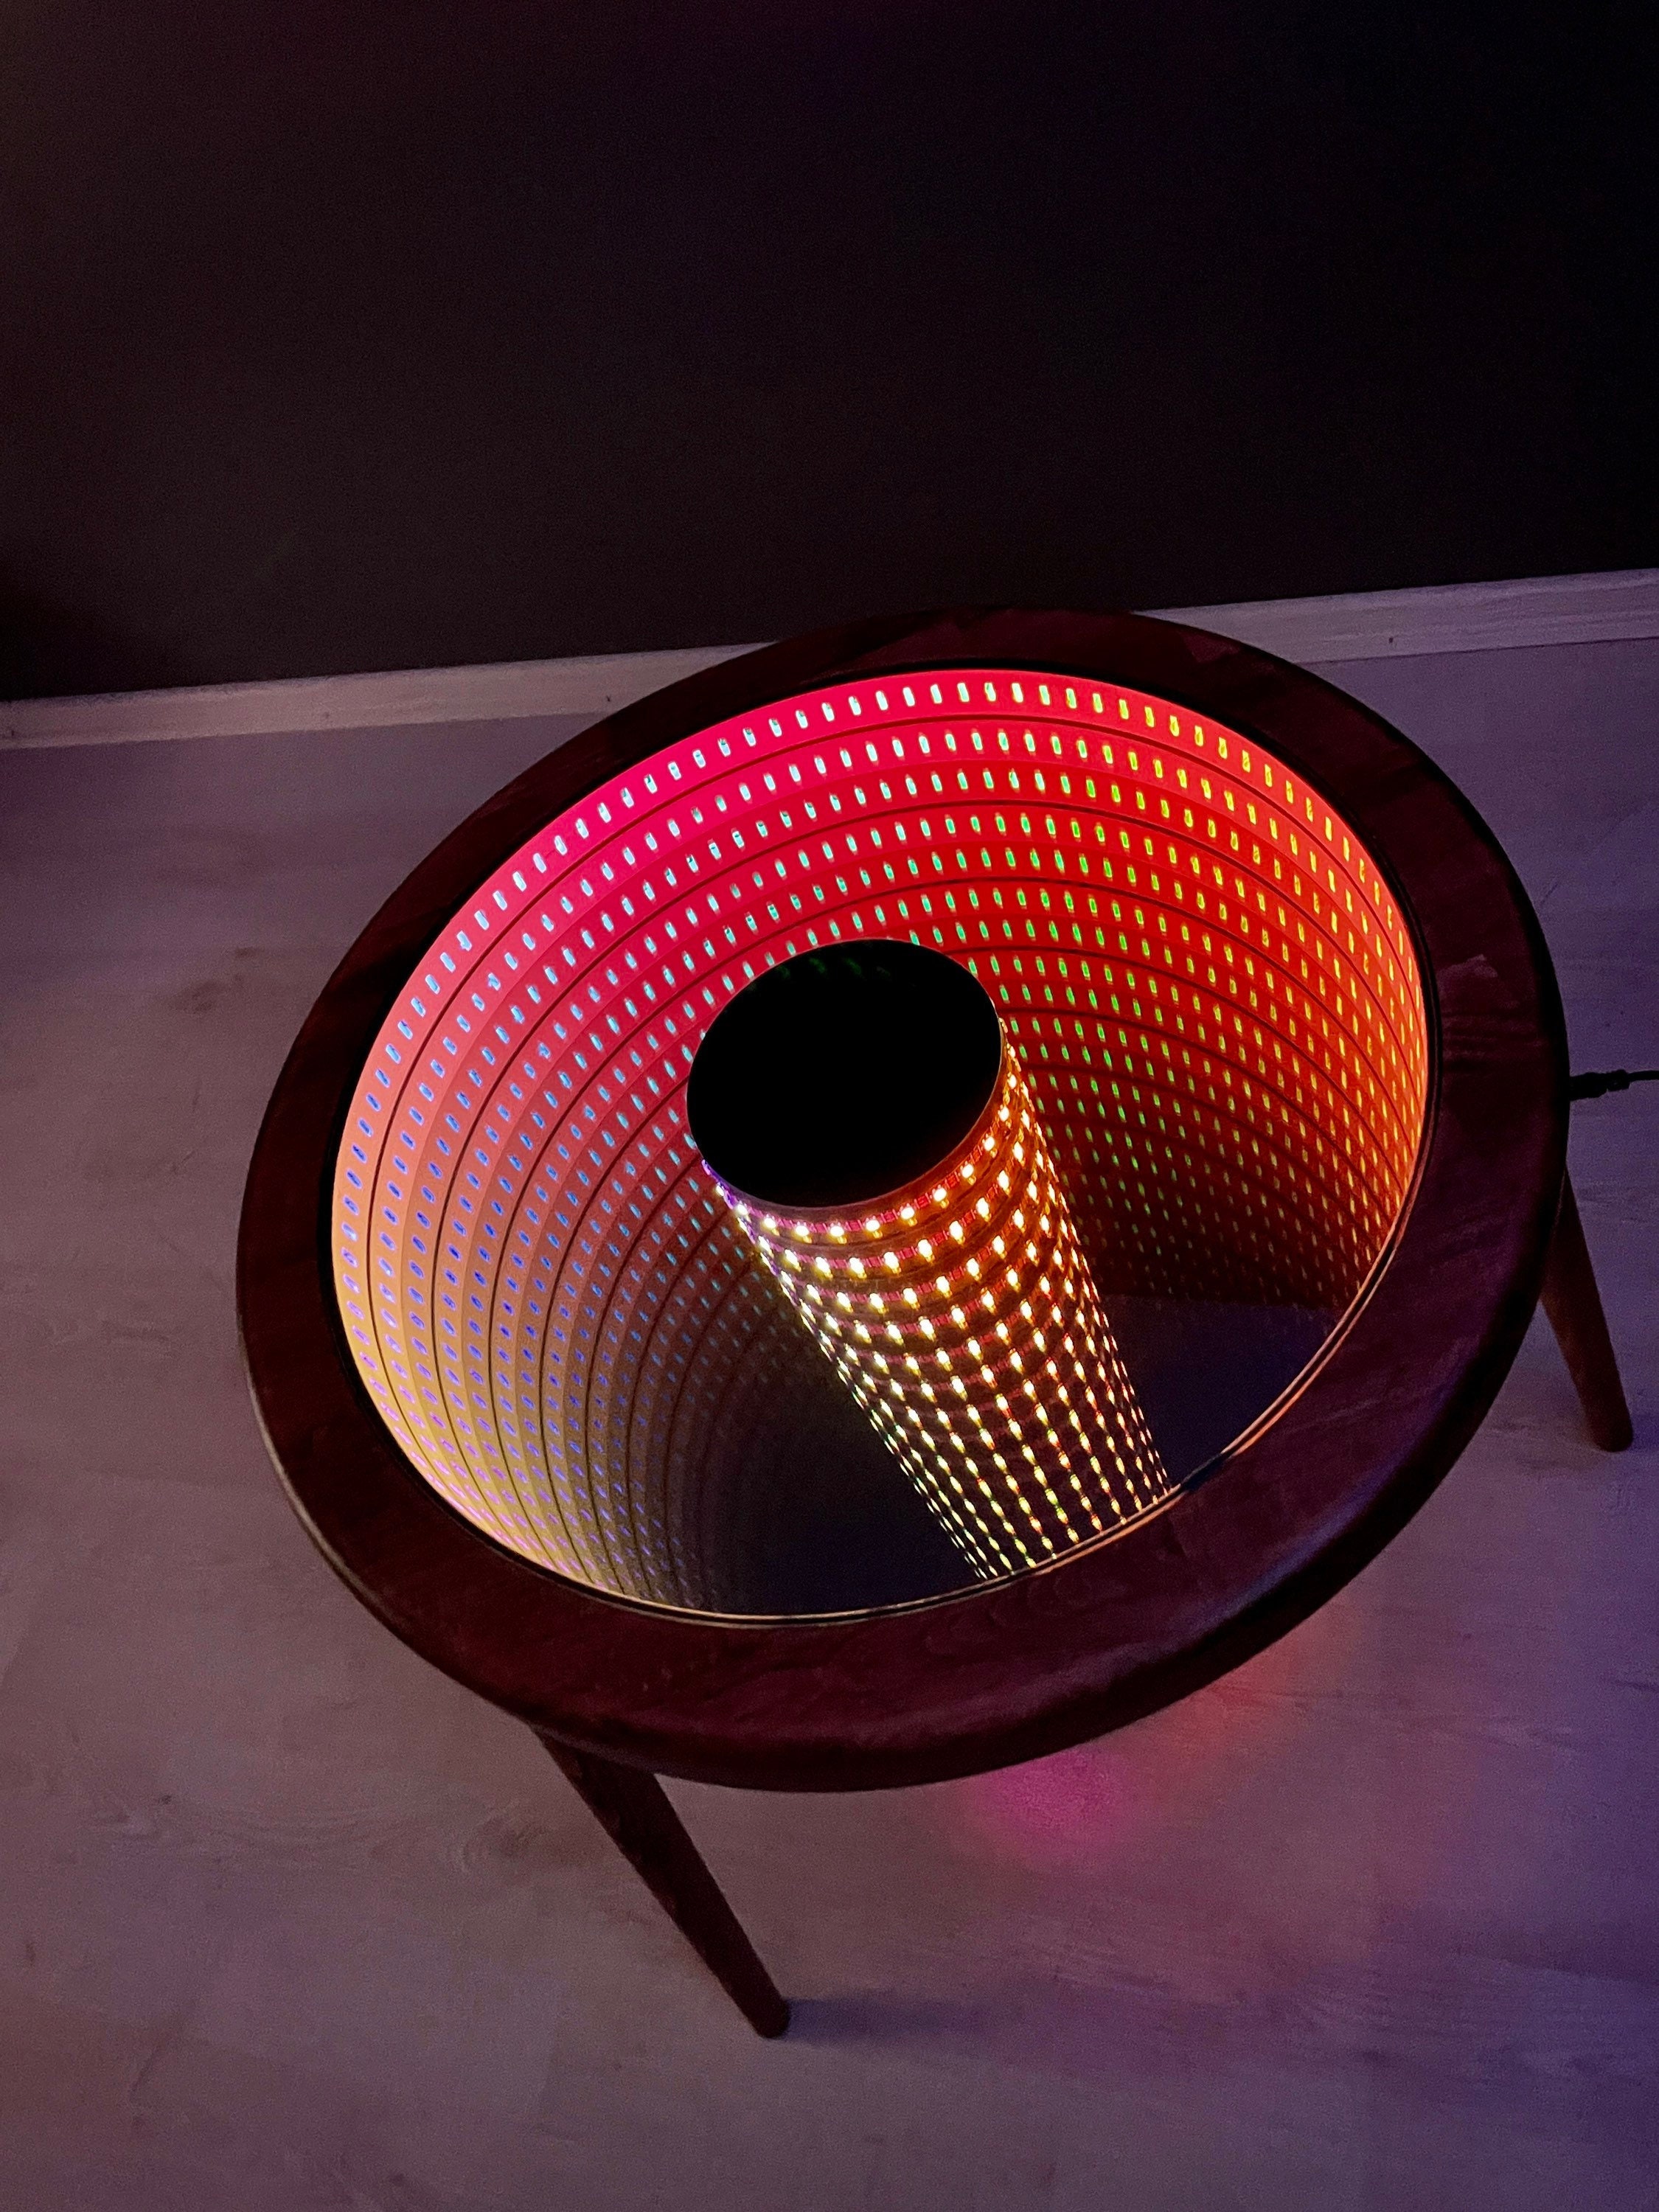 Infinity Mirror Coffee Table, Infinity Effect, Wooden Coffee Table, Color  Changing, Infinity Light, Led Light Decor, RGB Led Light Table 